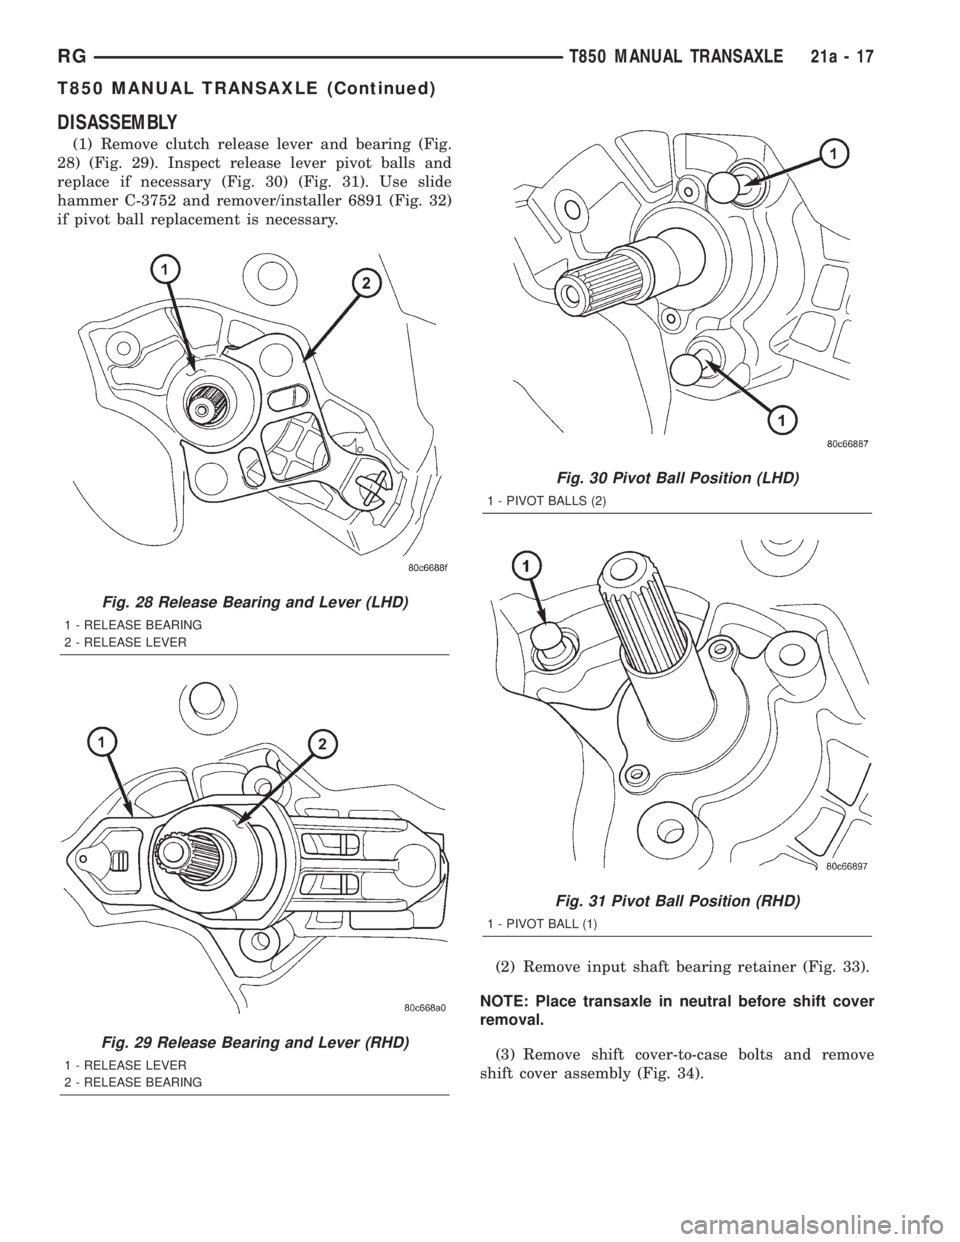 CHRYSLER VOYAGER 2001  Service Manual DISASSEMBLY
(1) Remove clutch release lever and bearing (Fig.
28) (Fig. 29). Inspect release lever pivot balls and
replace if necessary (Fig. 30) (Fig. 31). Use slide
hammer C-3752 and remover/install